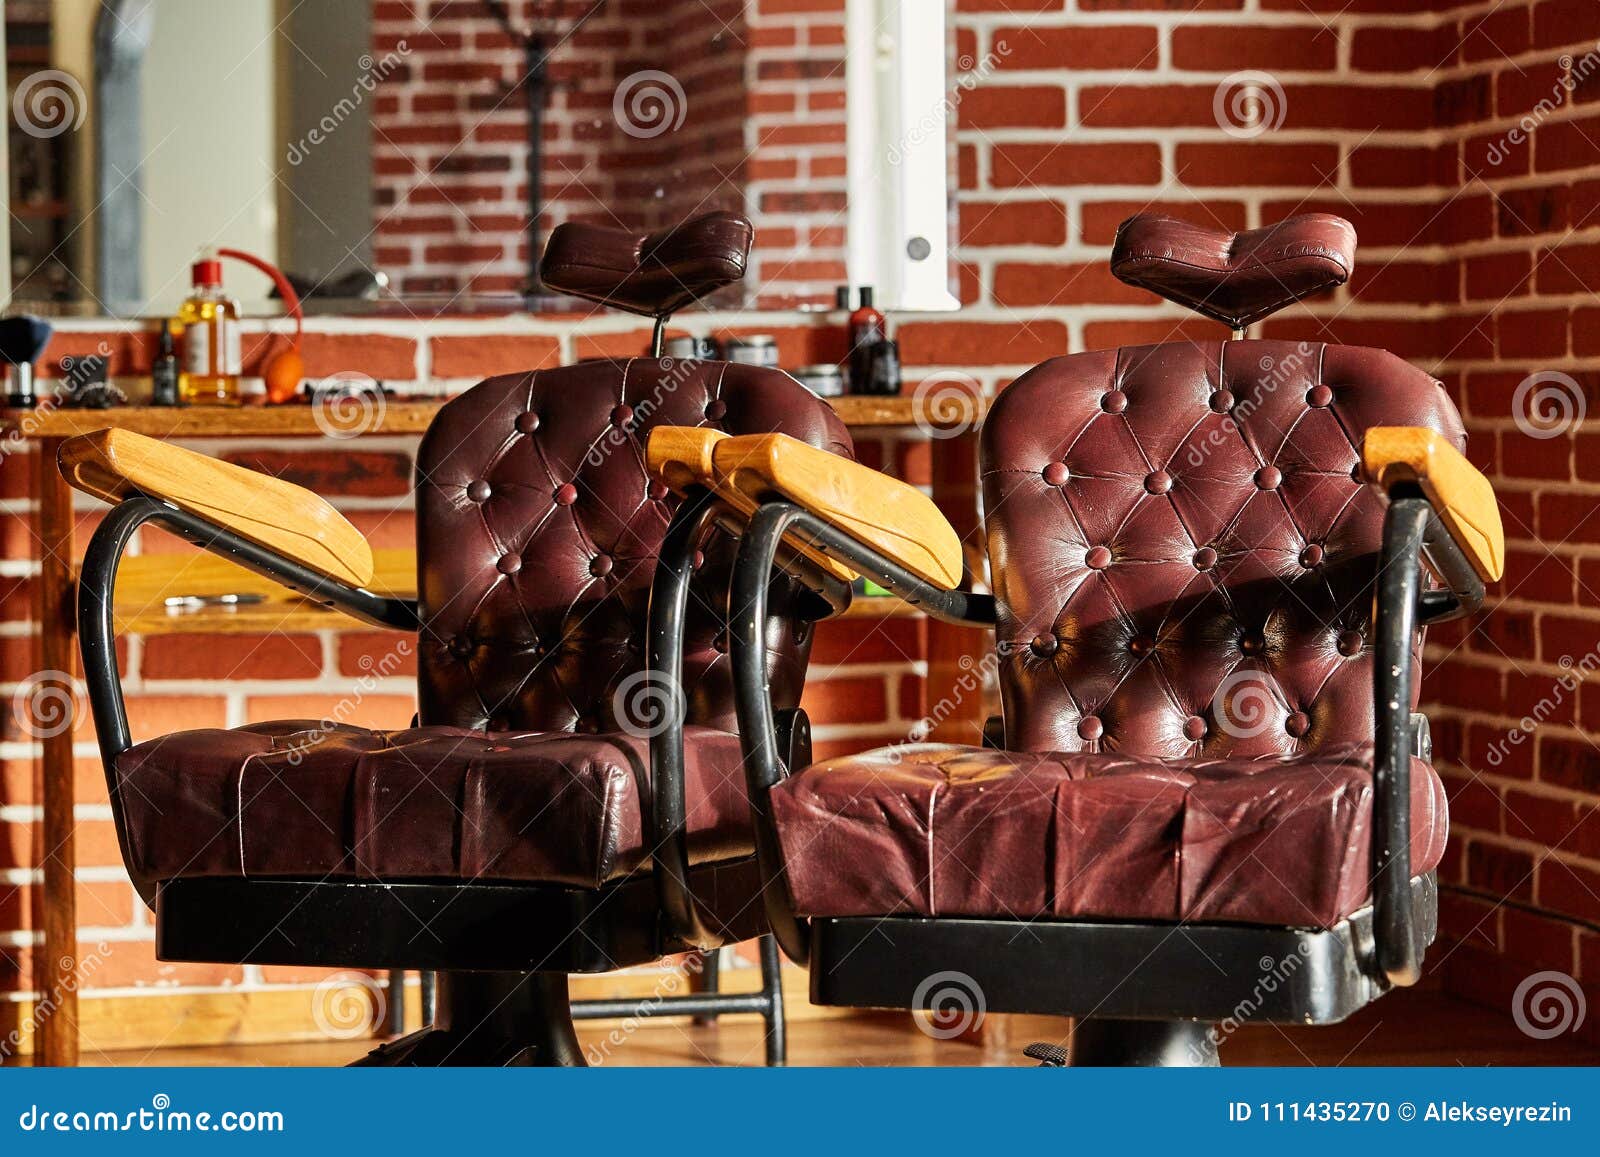 Retro Leather Chair Barber Shop In Vintage Style Barbershop Theme